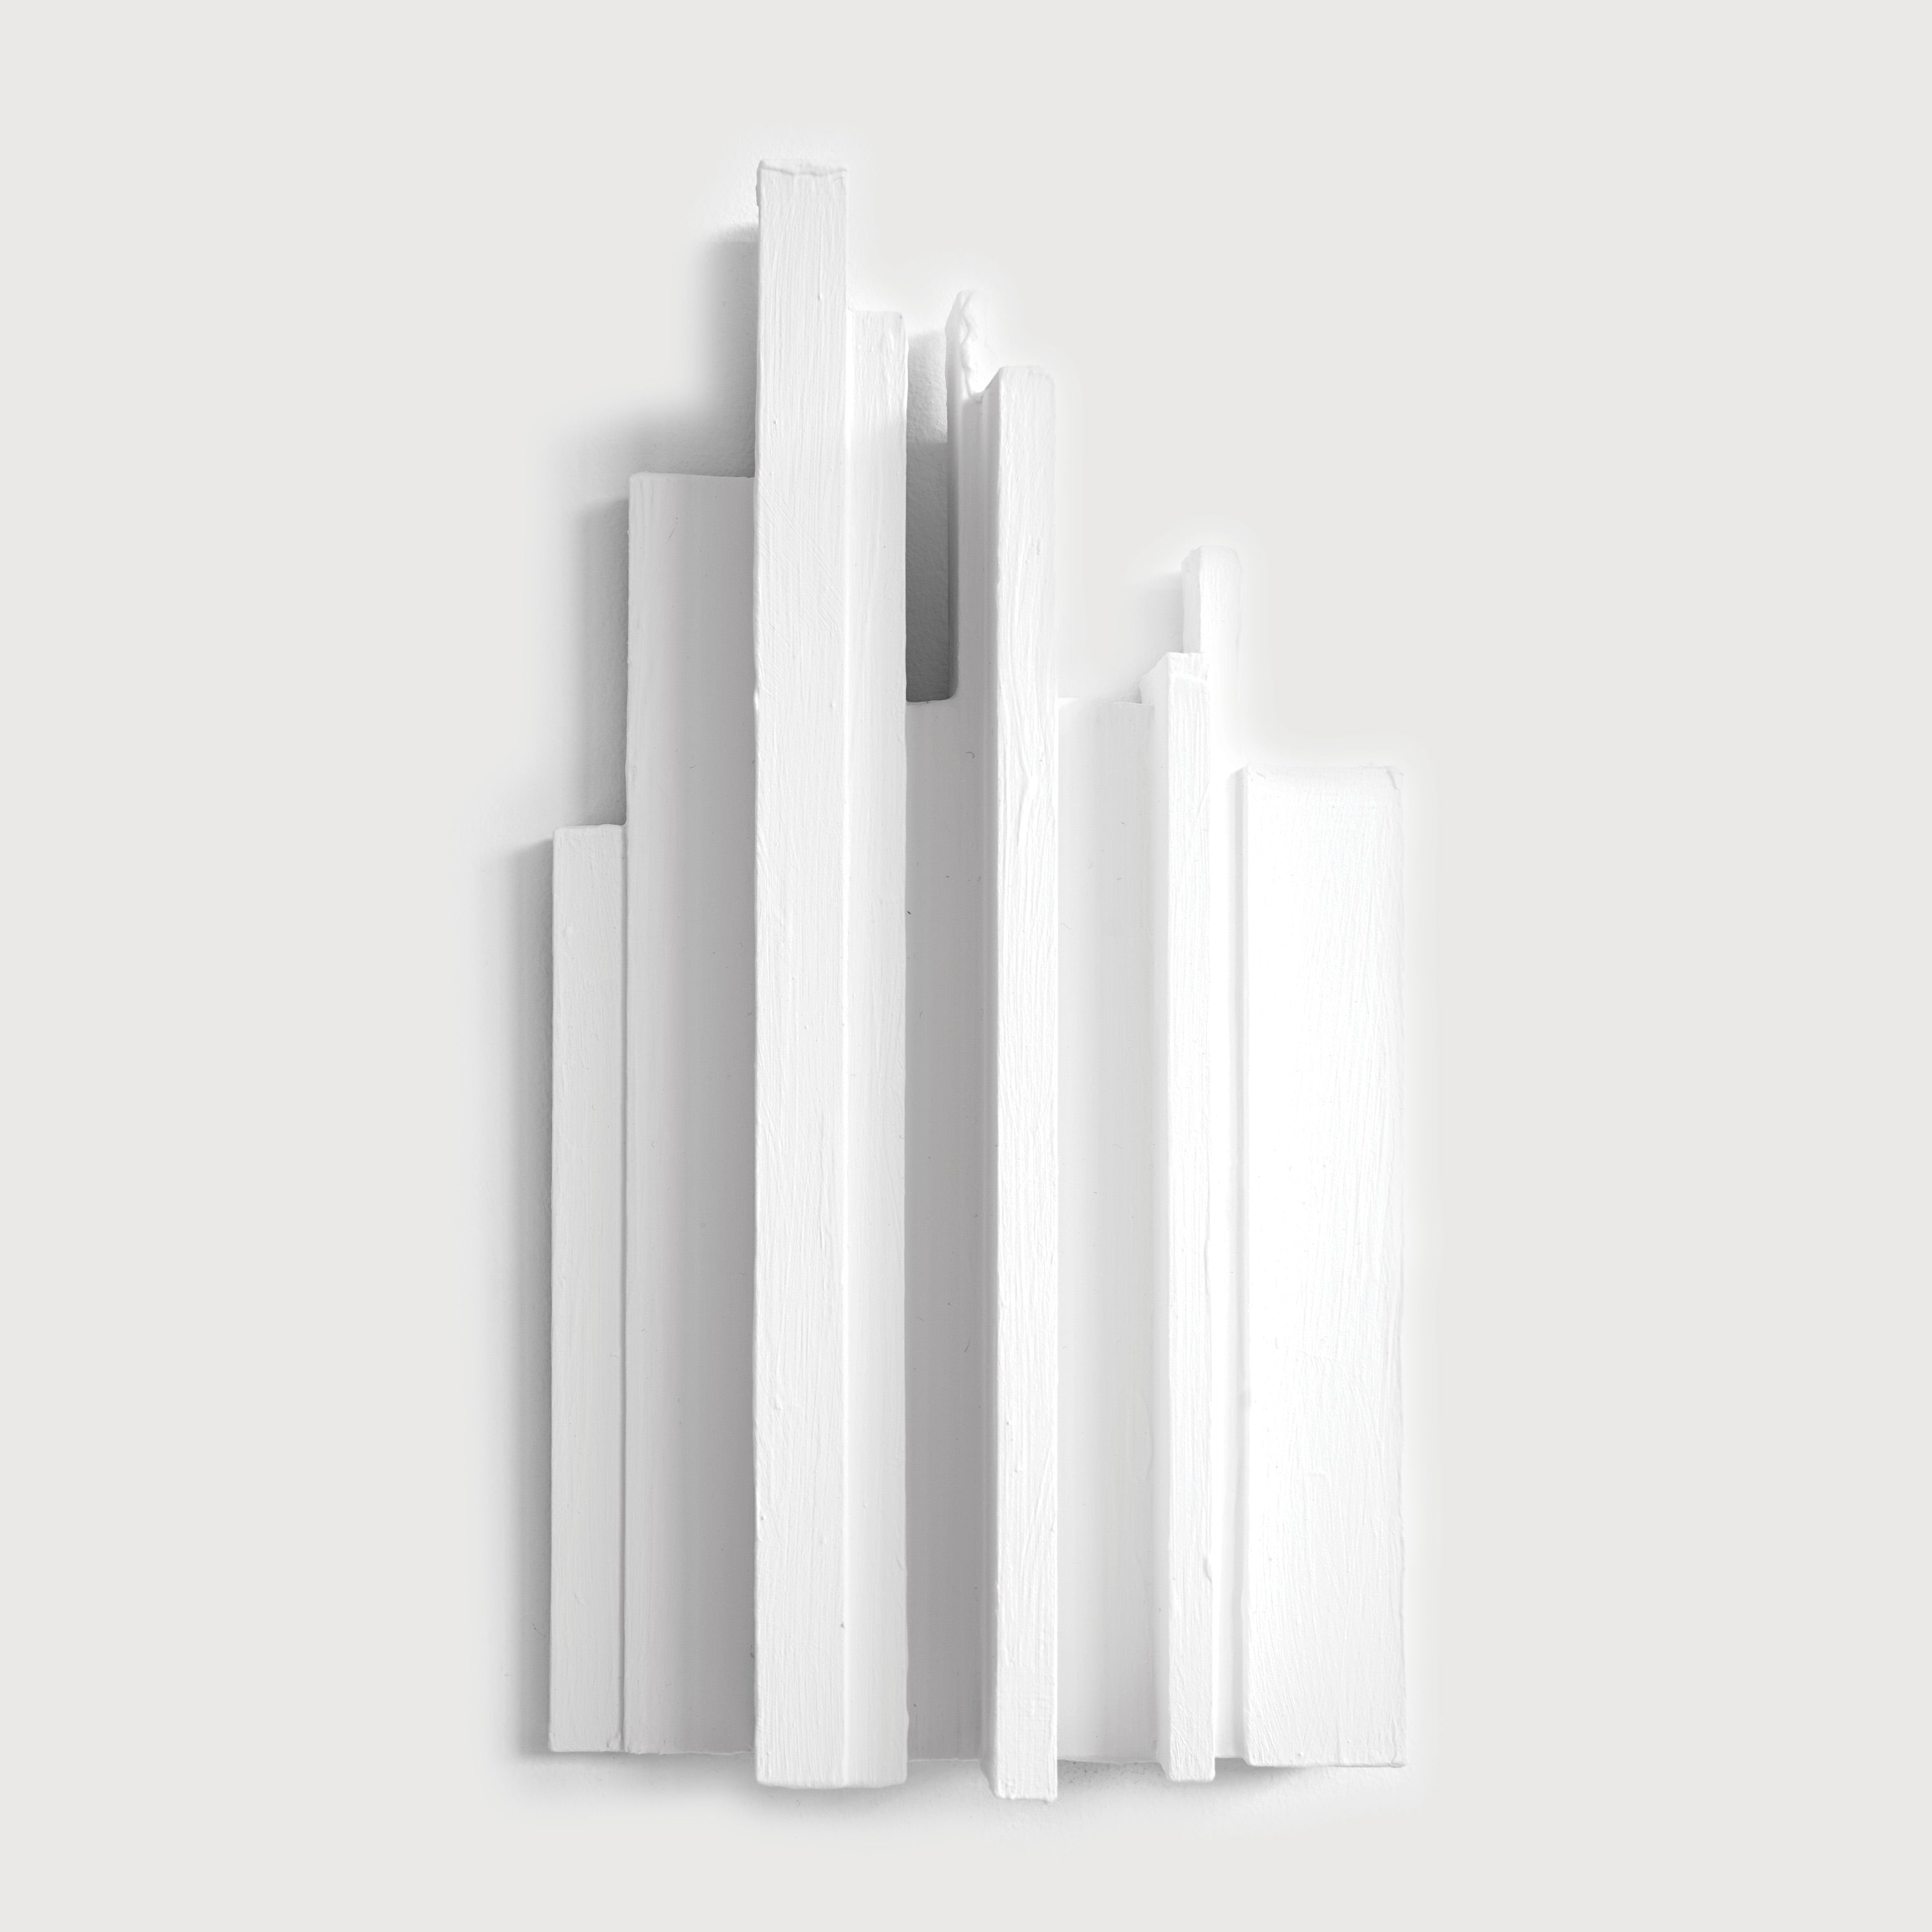 Eleven White Boetti Spines / edition 2019 by Jonathan Monk second image